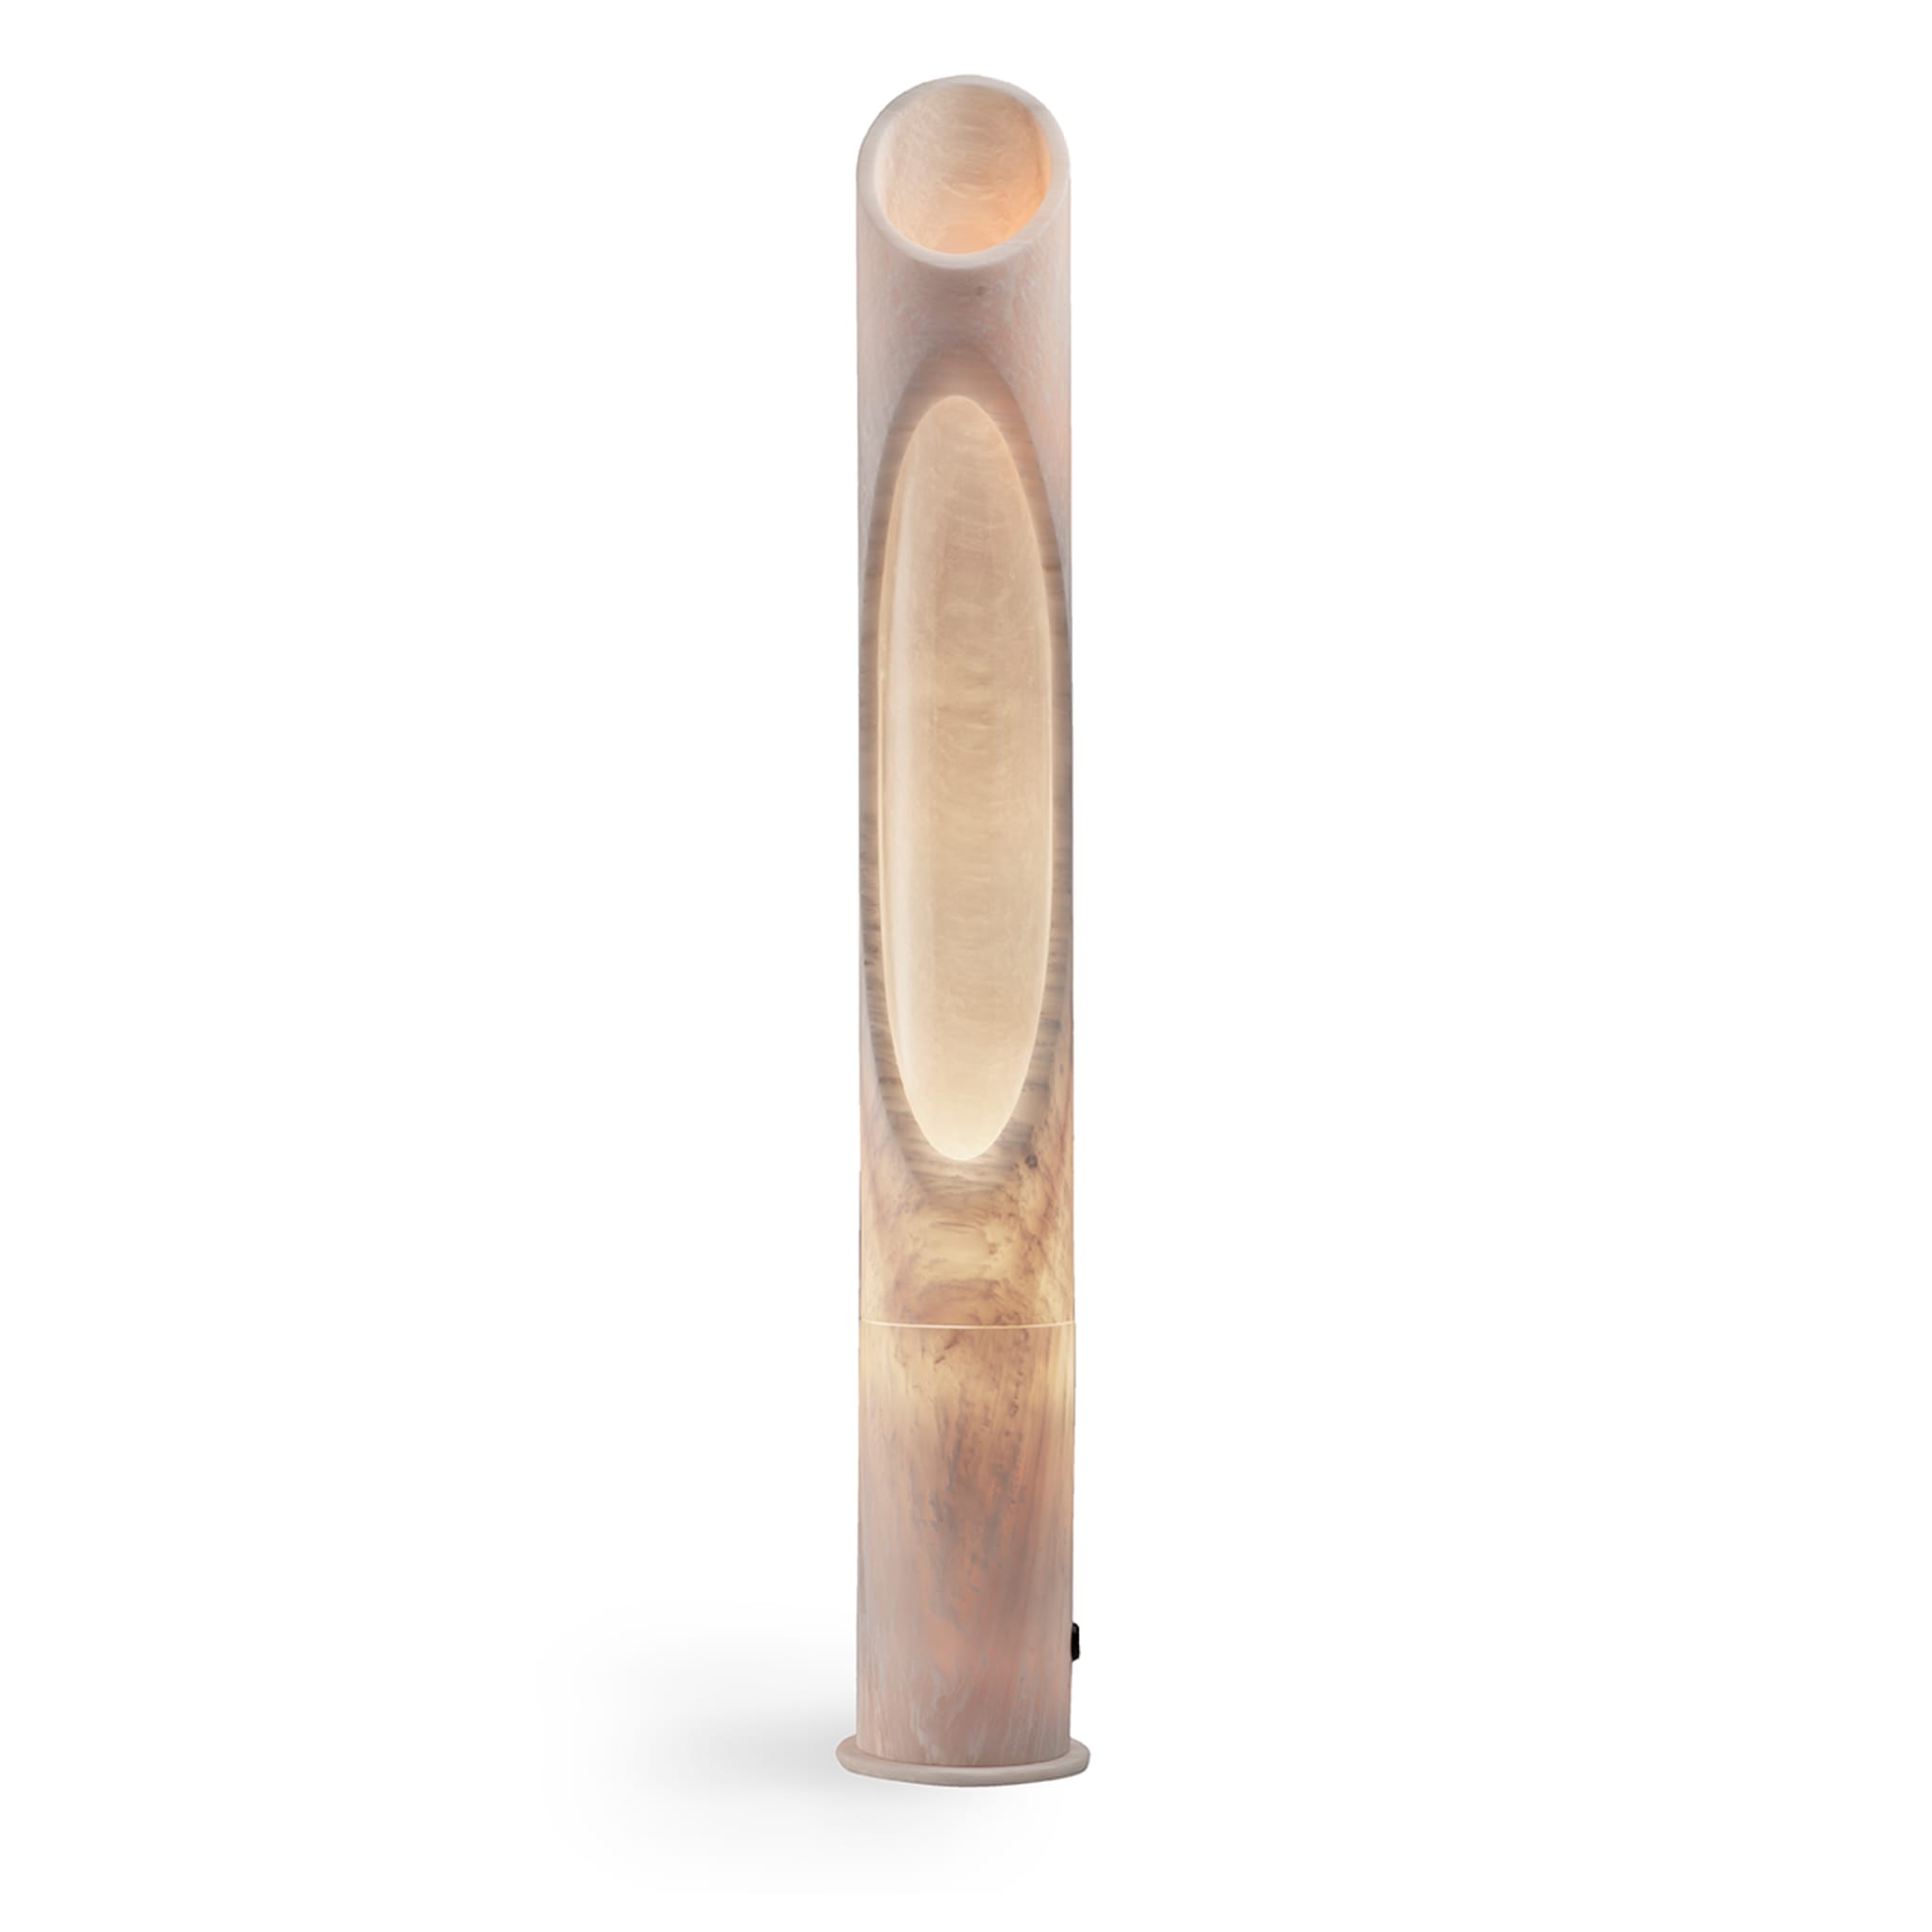 Armonia Lamp L in Pink Egeo marble by Jacopo Simonetti - Alternative view 3